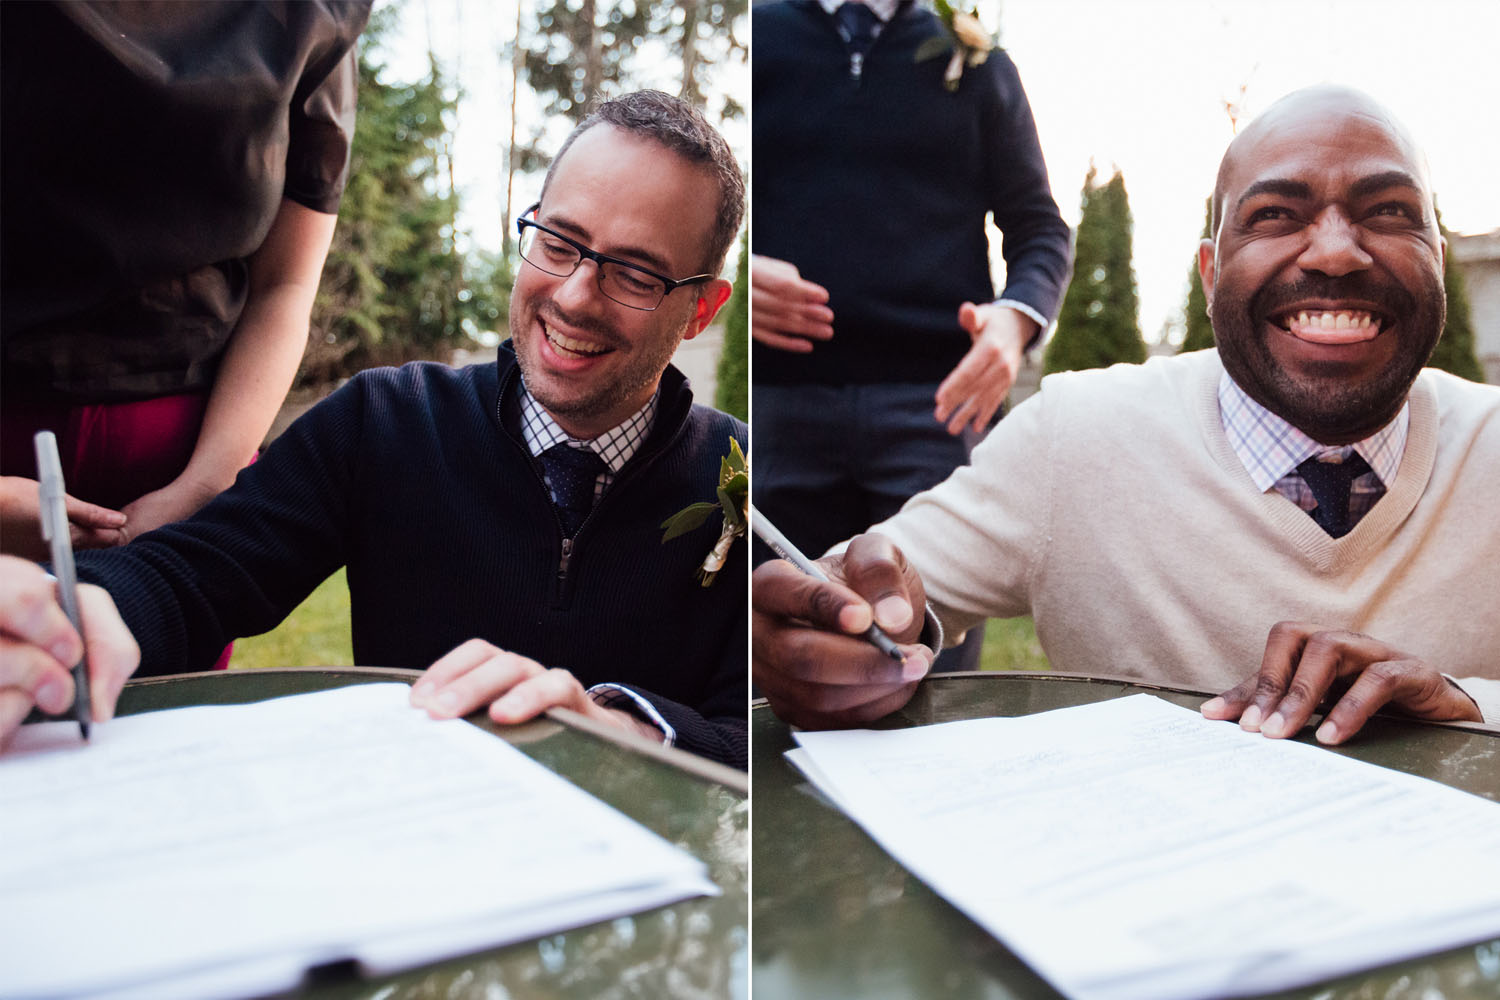  Phillip Jefferies (left) and Lance Lewis (right) smile as they sign their marriage certificate on their wedding day.